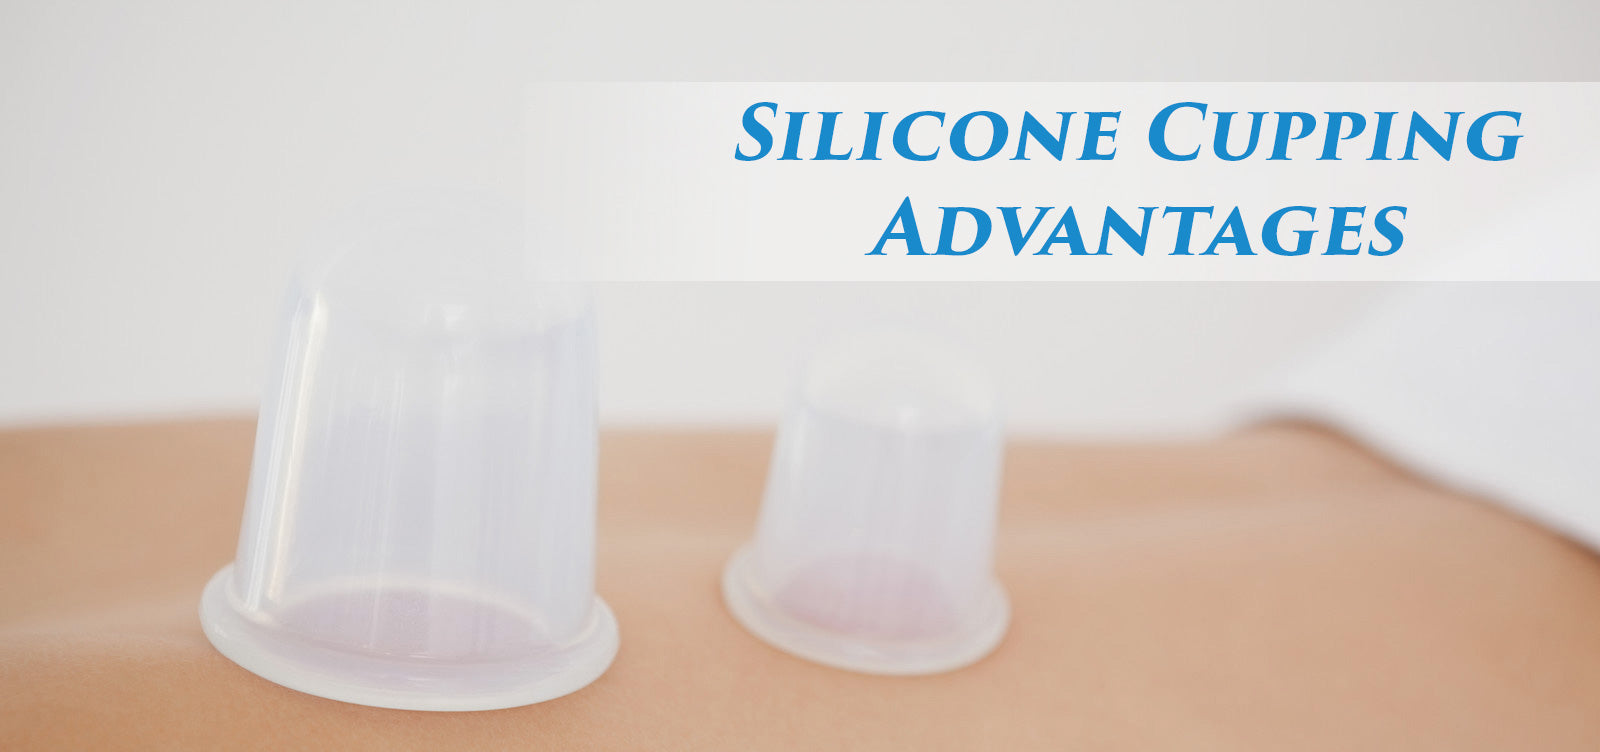 Why does silicone cupping set is getting more popular?